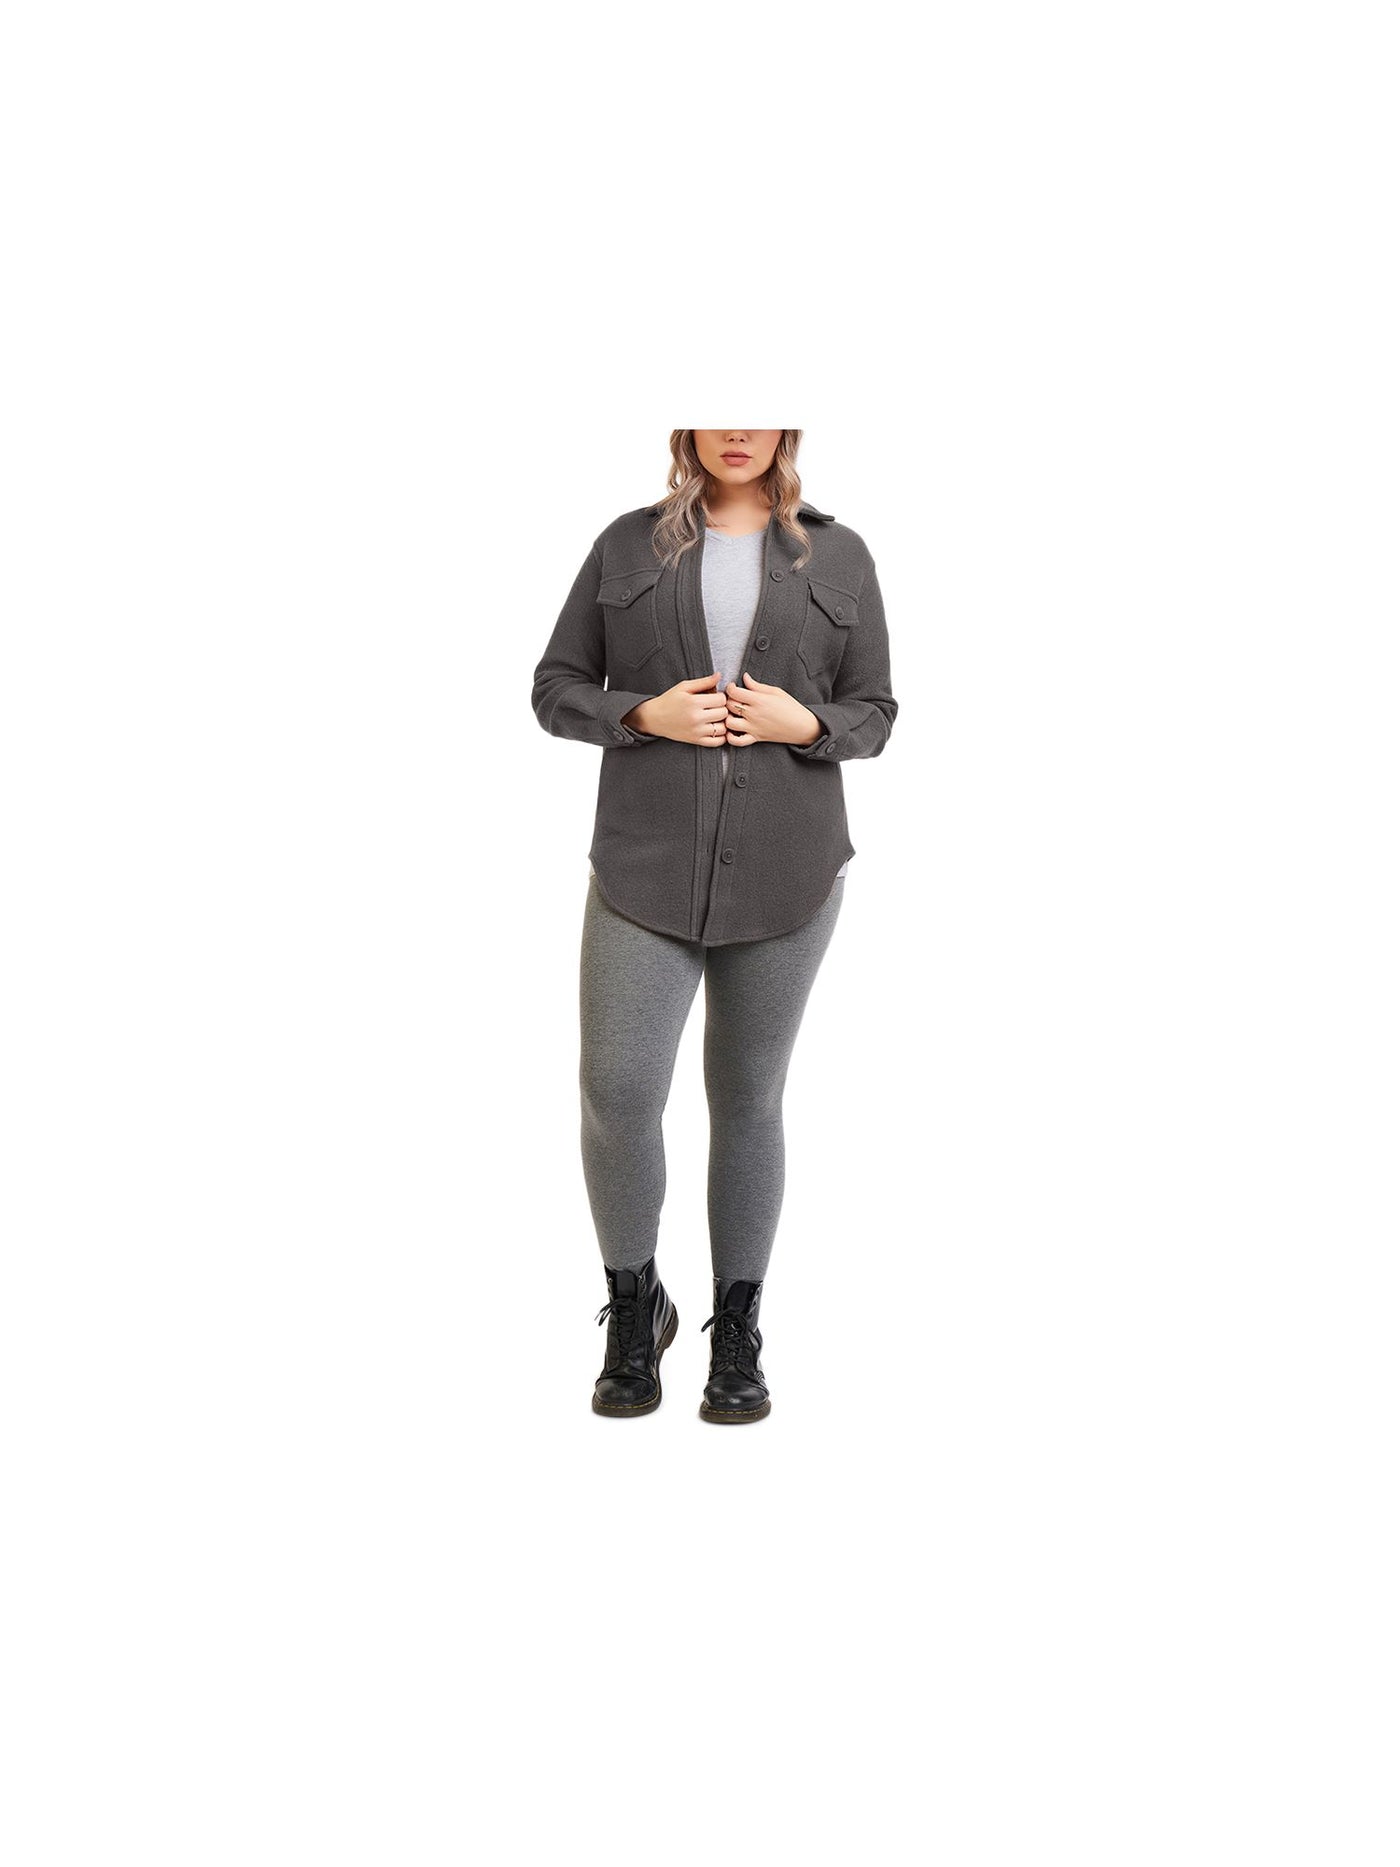 DEX Womens Gray Stretch Pocketed Textured Heather Cuffed Sleeve Collared Button Down Jacket Plus 1X